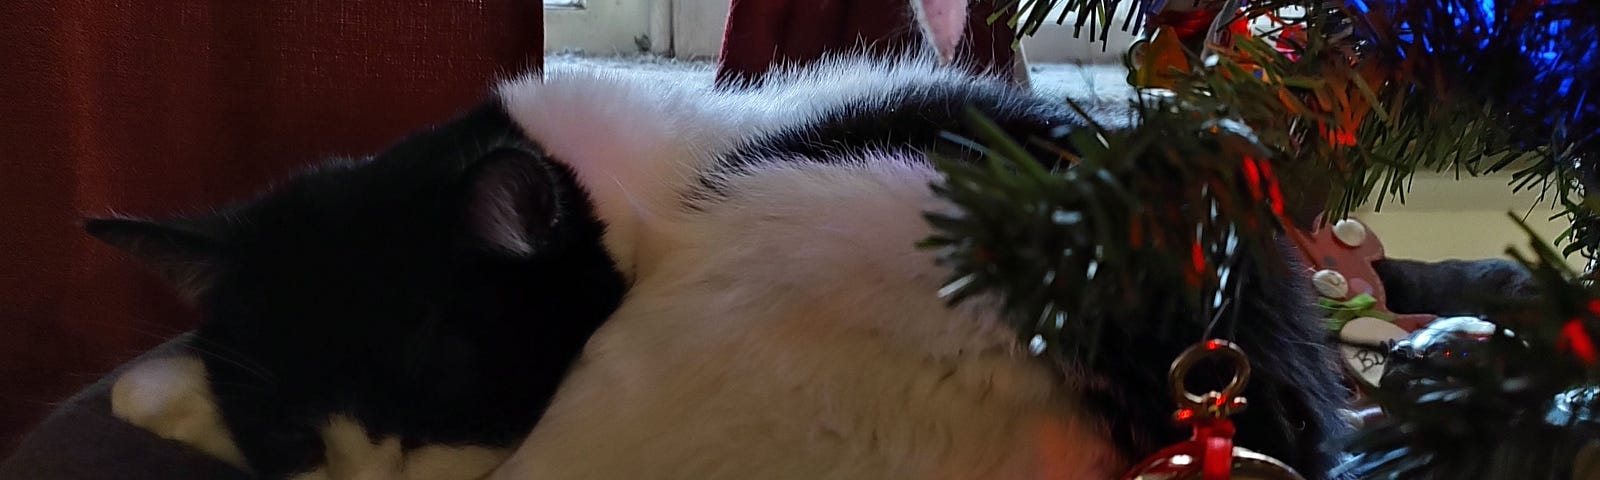 Our white kitty with black markings and mask continues to nap under the Christmas tree